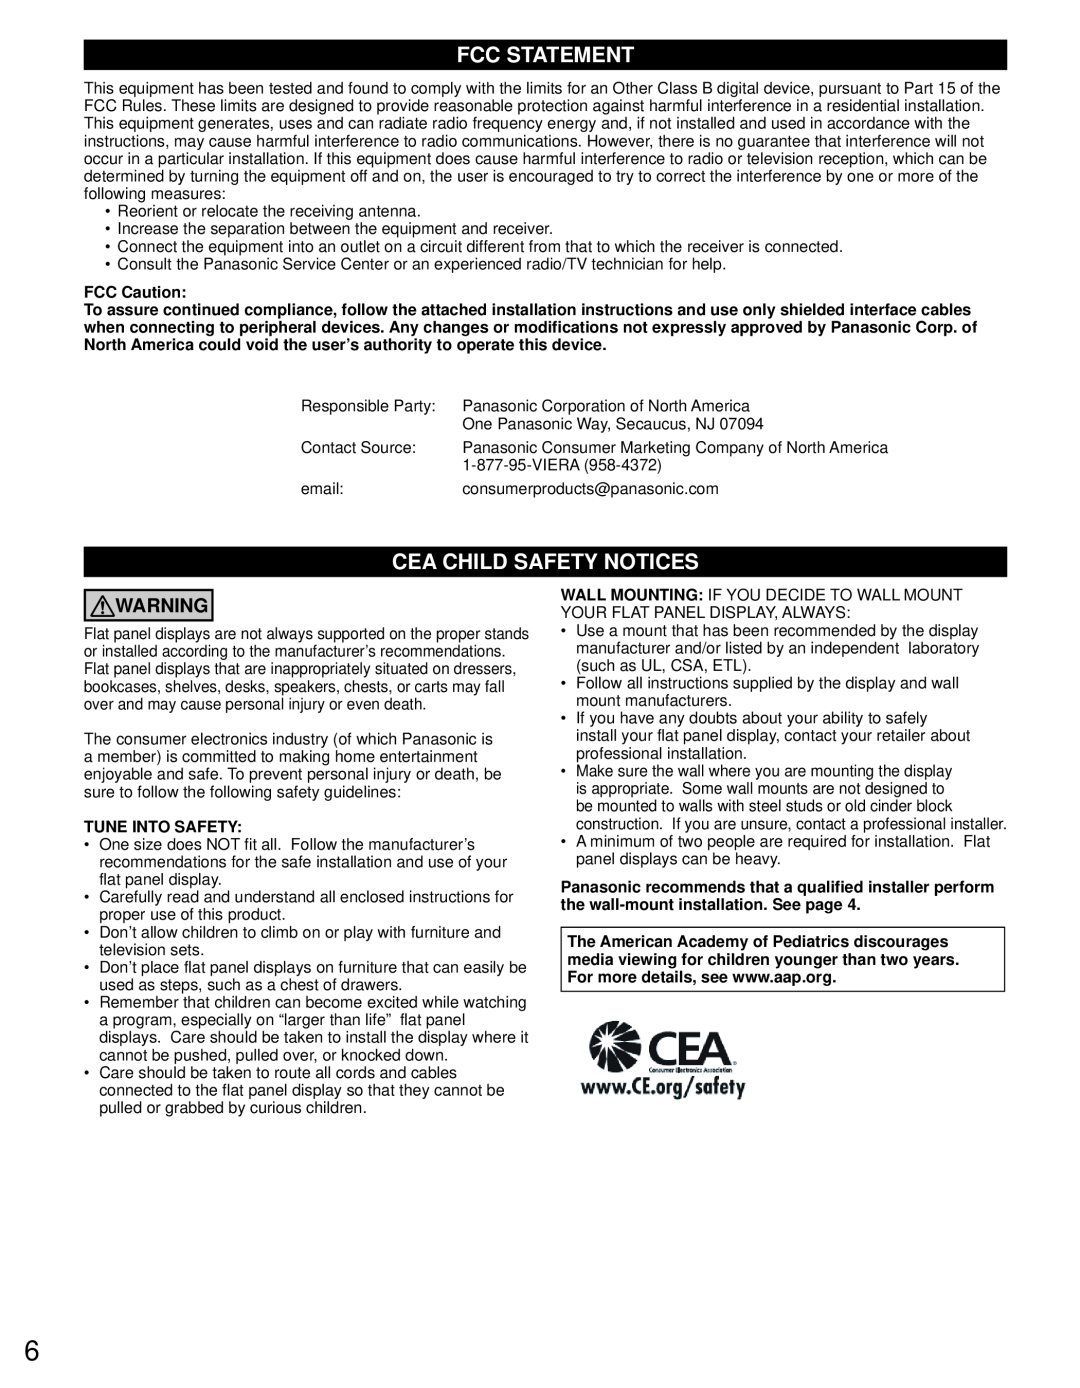 Panasonic TC-P60U50 owner manual Fcc Statement, Cea Child Safety Notices, FCC Caution, Tune Into Safety 